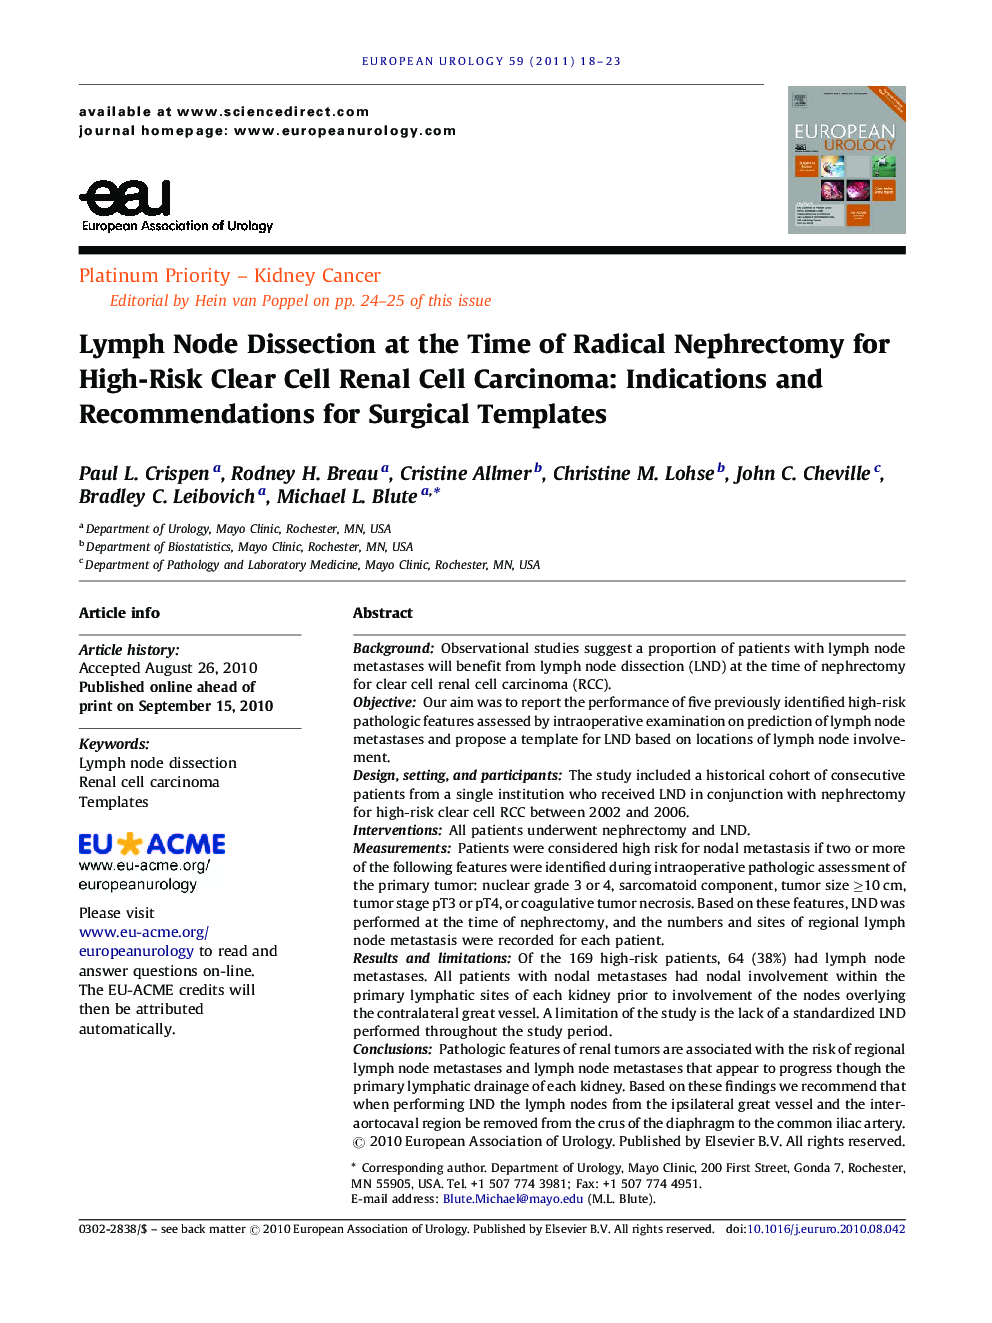 Lymph Node Dissection at the Time of Radical Nephrectomy for High-Risk Clear Cell Renal Cell Carcinoma: Indications and Recommendations for Surgical Templates 